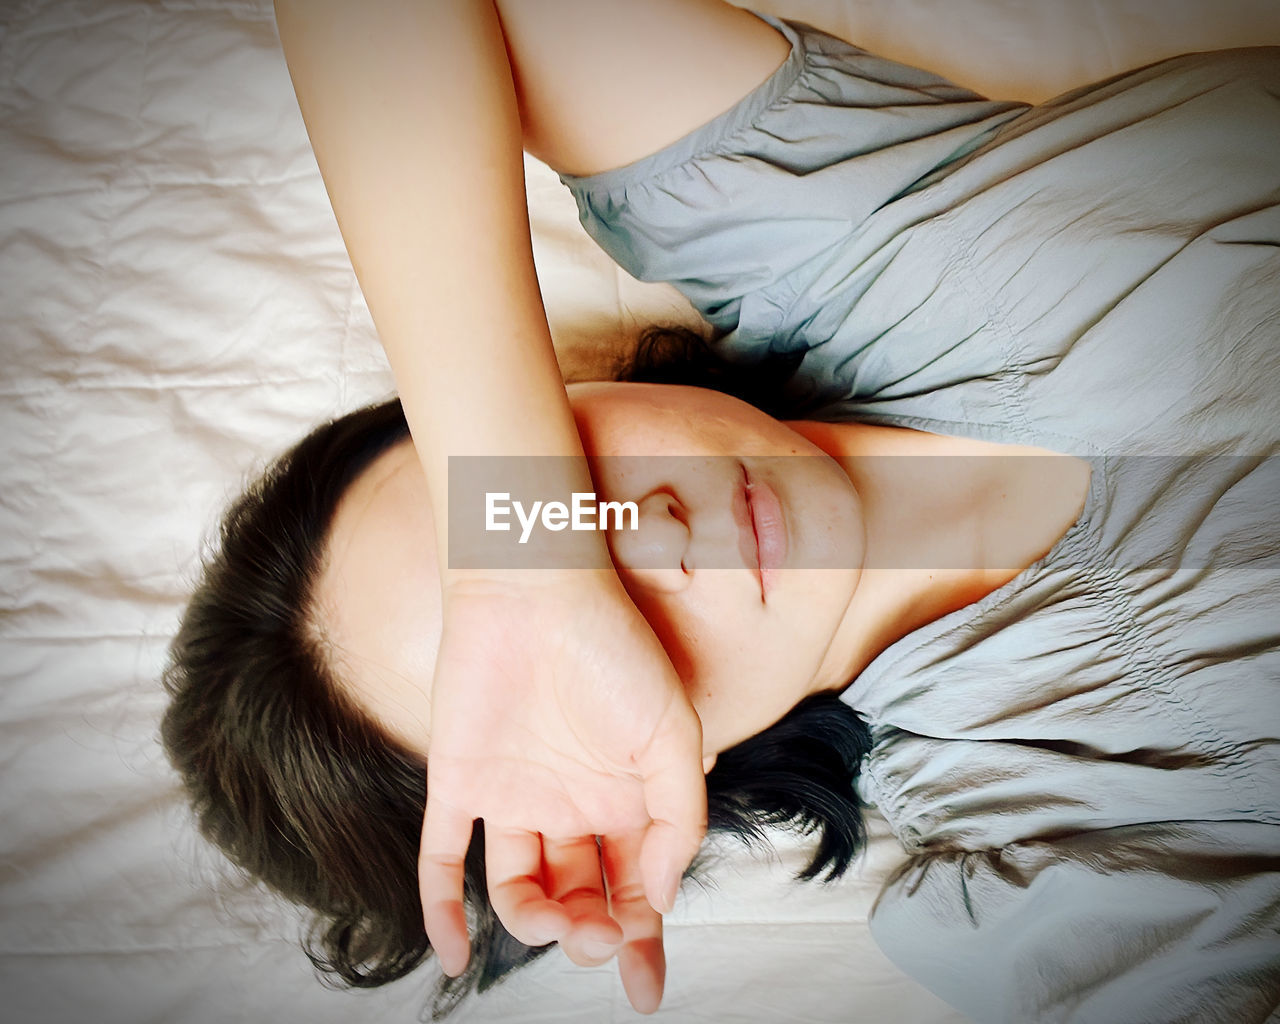 Image of woman lying on bed looking tired